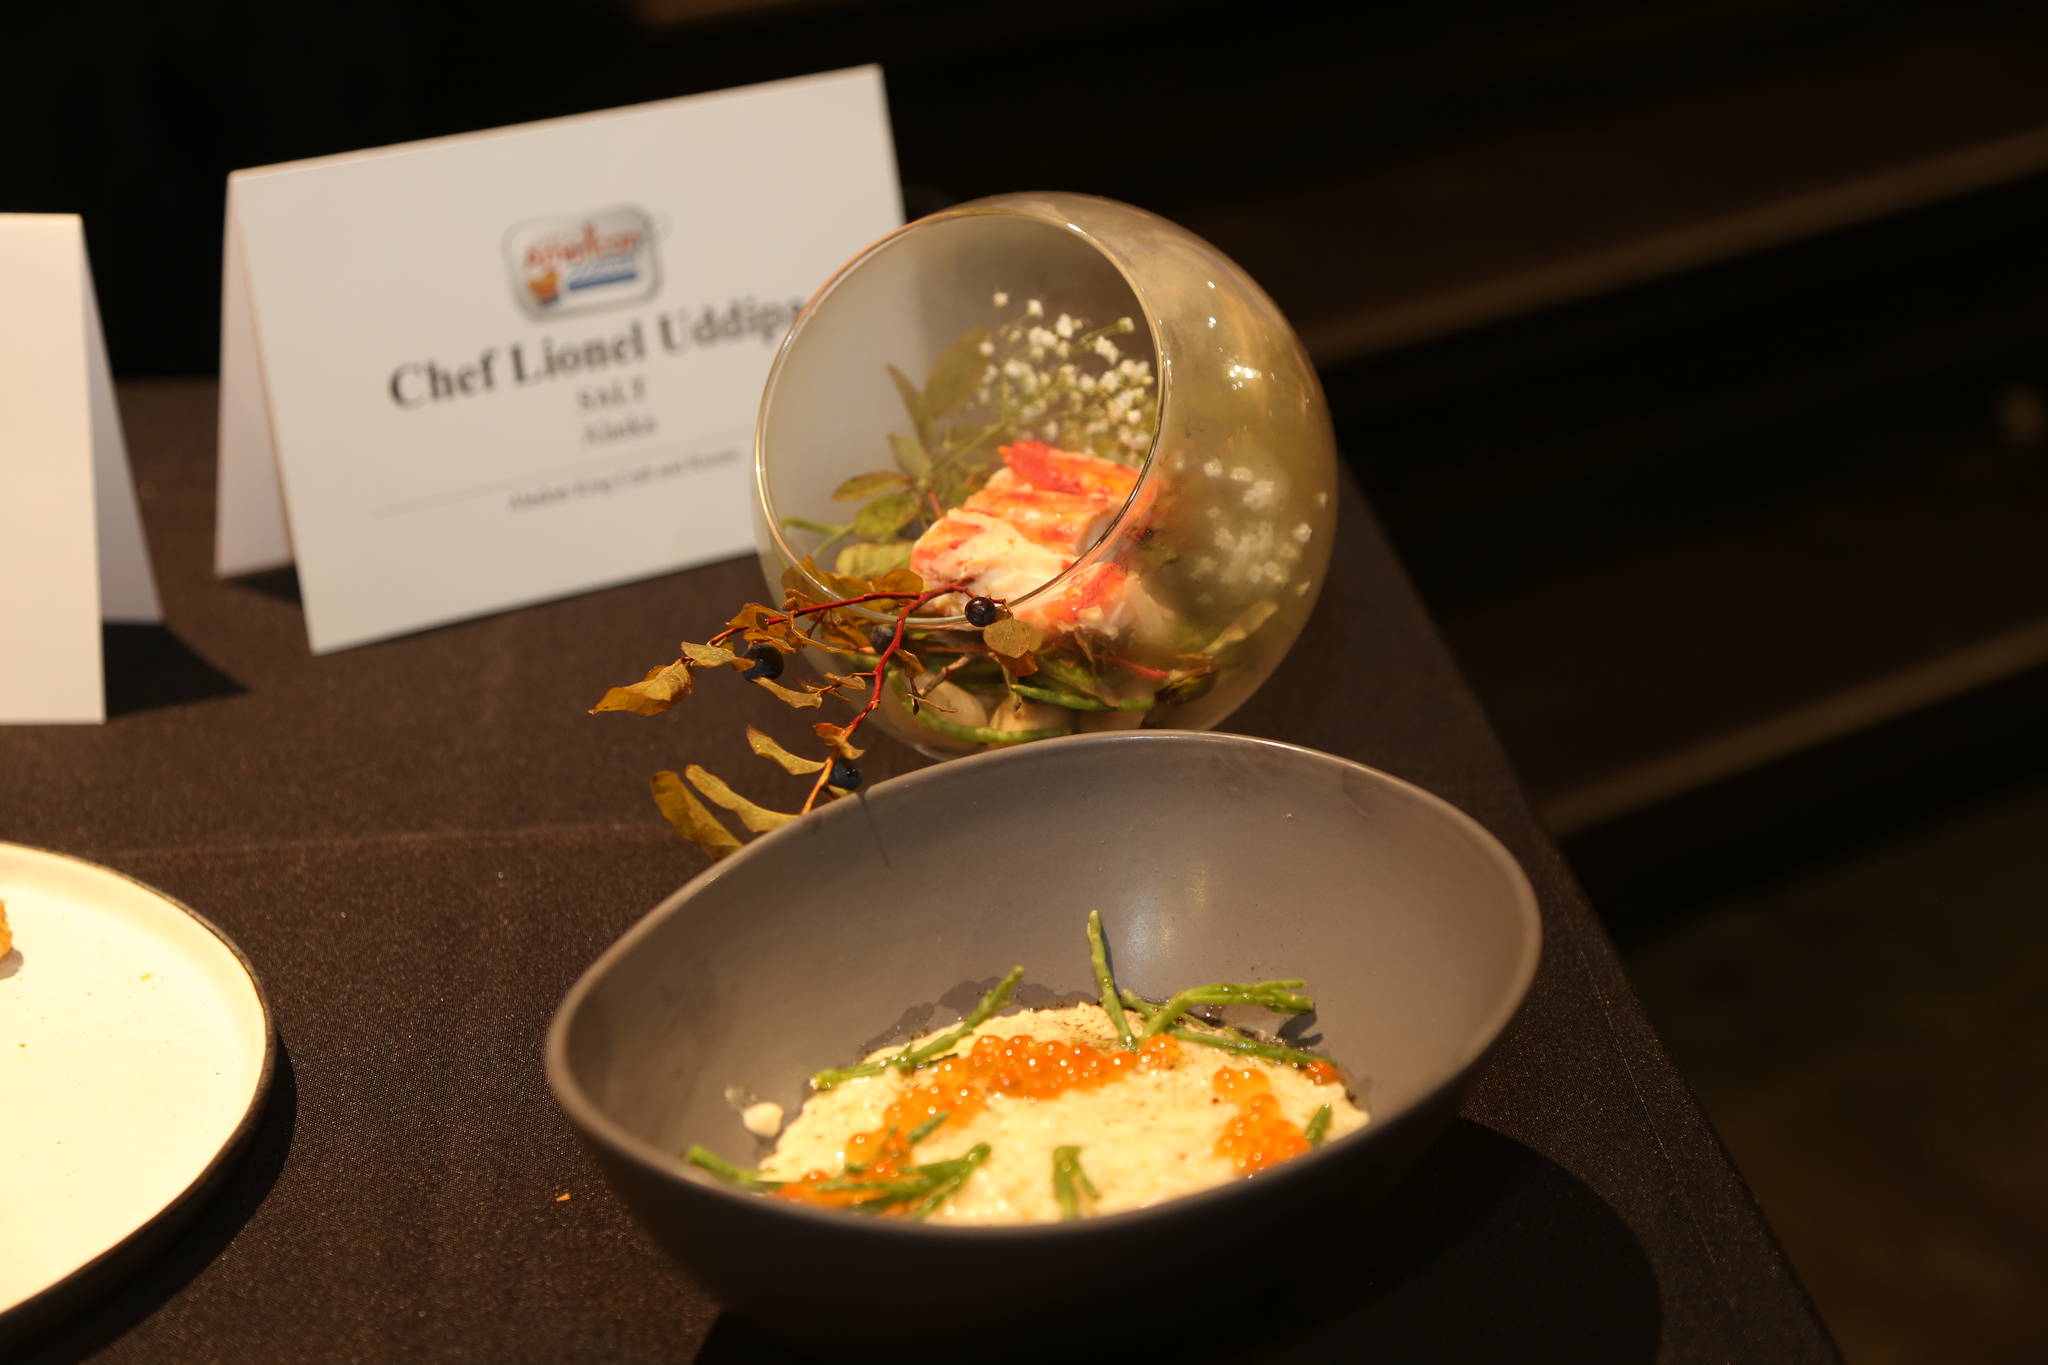 SALT Alaska Executive Chef Lionel Uddipa’s award-winning Alaska King Crab Risotto is displayed at the Great American Seafood Cookoff on Saturday. Uddipa’s win is the second in three years for a Juneau chef.